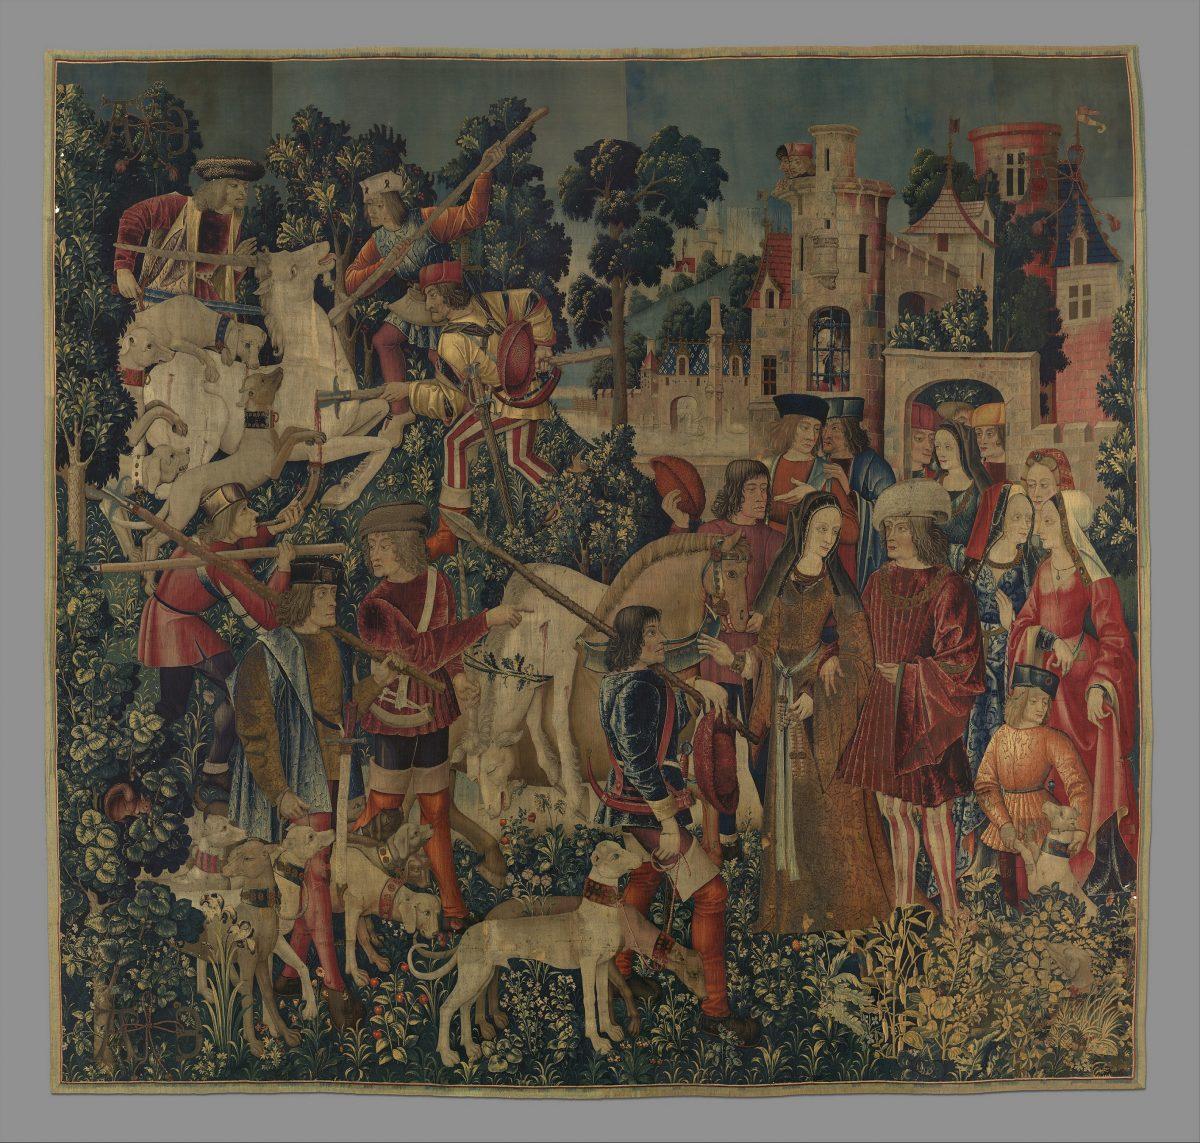 “The Unicorn Is Killed and Brought to the Castle,” 1495–1505, South Netherlandish. Wool warp with wool, silk, silver, and gilt wefts; 145 inches by 153 inches. Gift of John D. Rockefeller Jr., 1937, The Met Cloisters. (The Metropolitan Museum of Art )